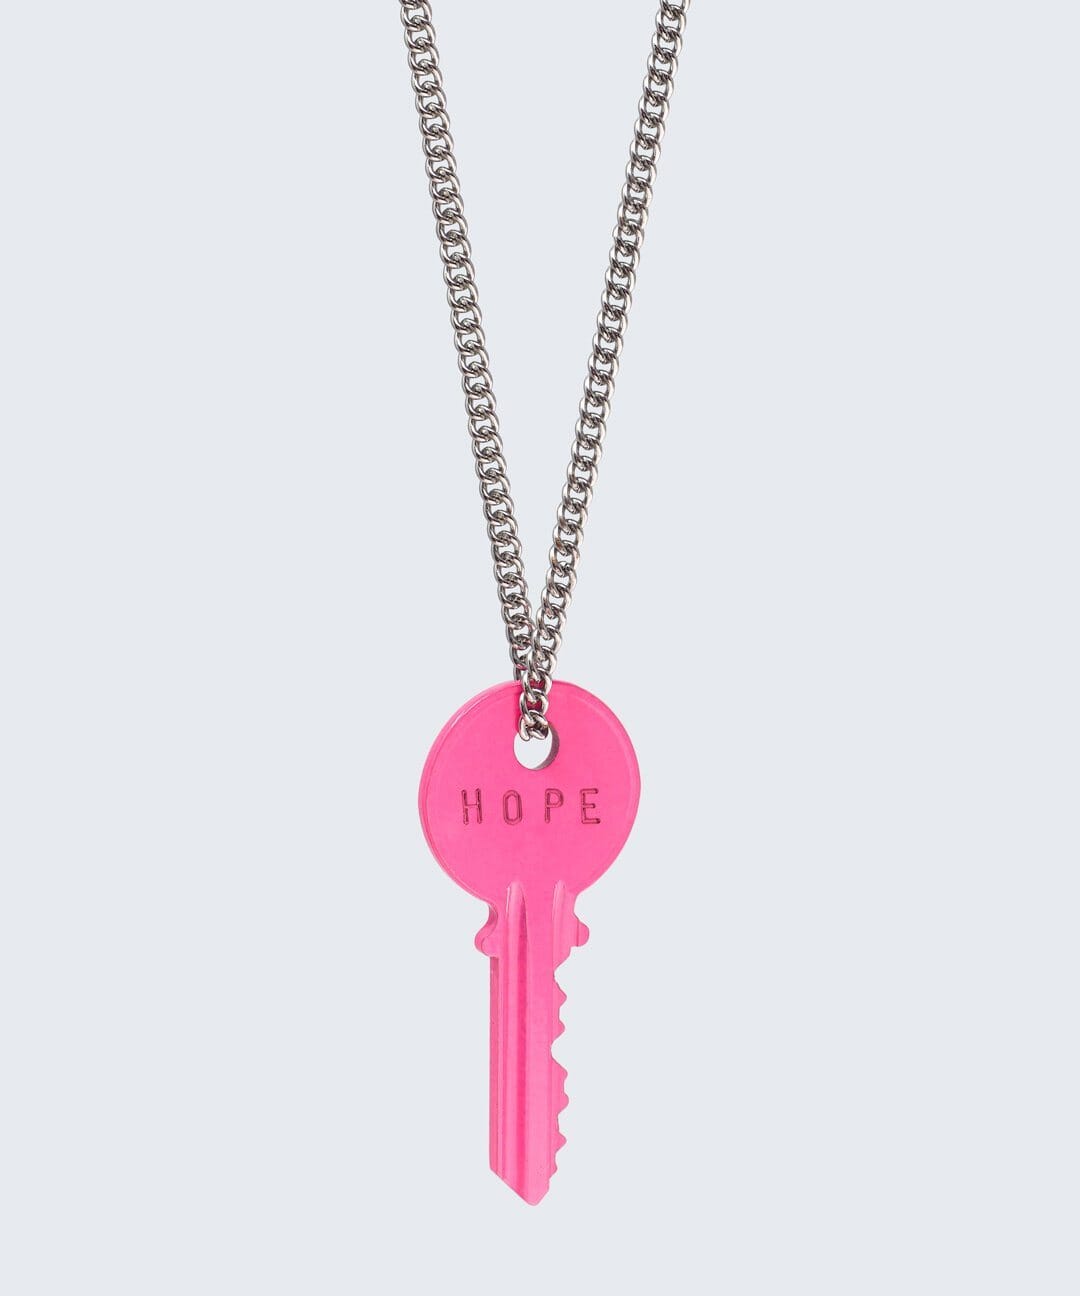 N - Hot Pink Classic Ball Chain Key Necklace Necklaces The Giving Keys 